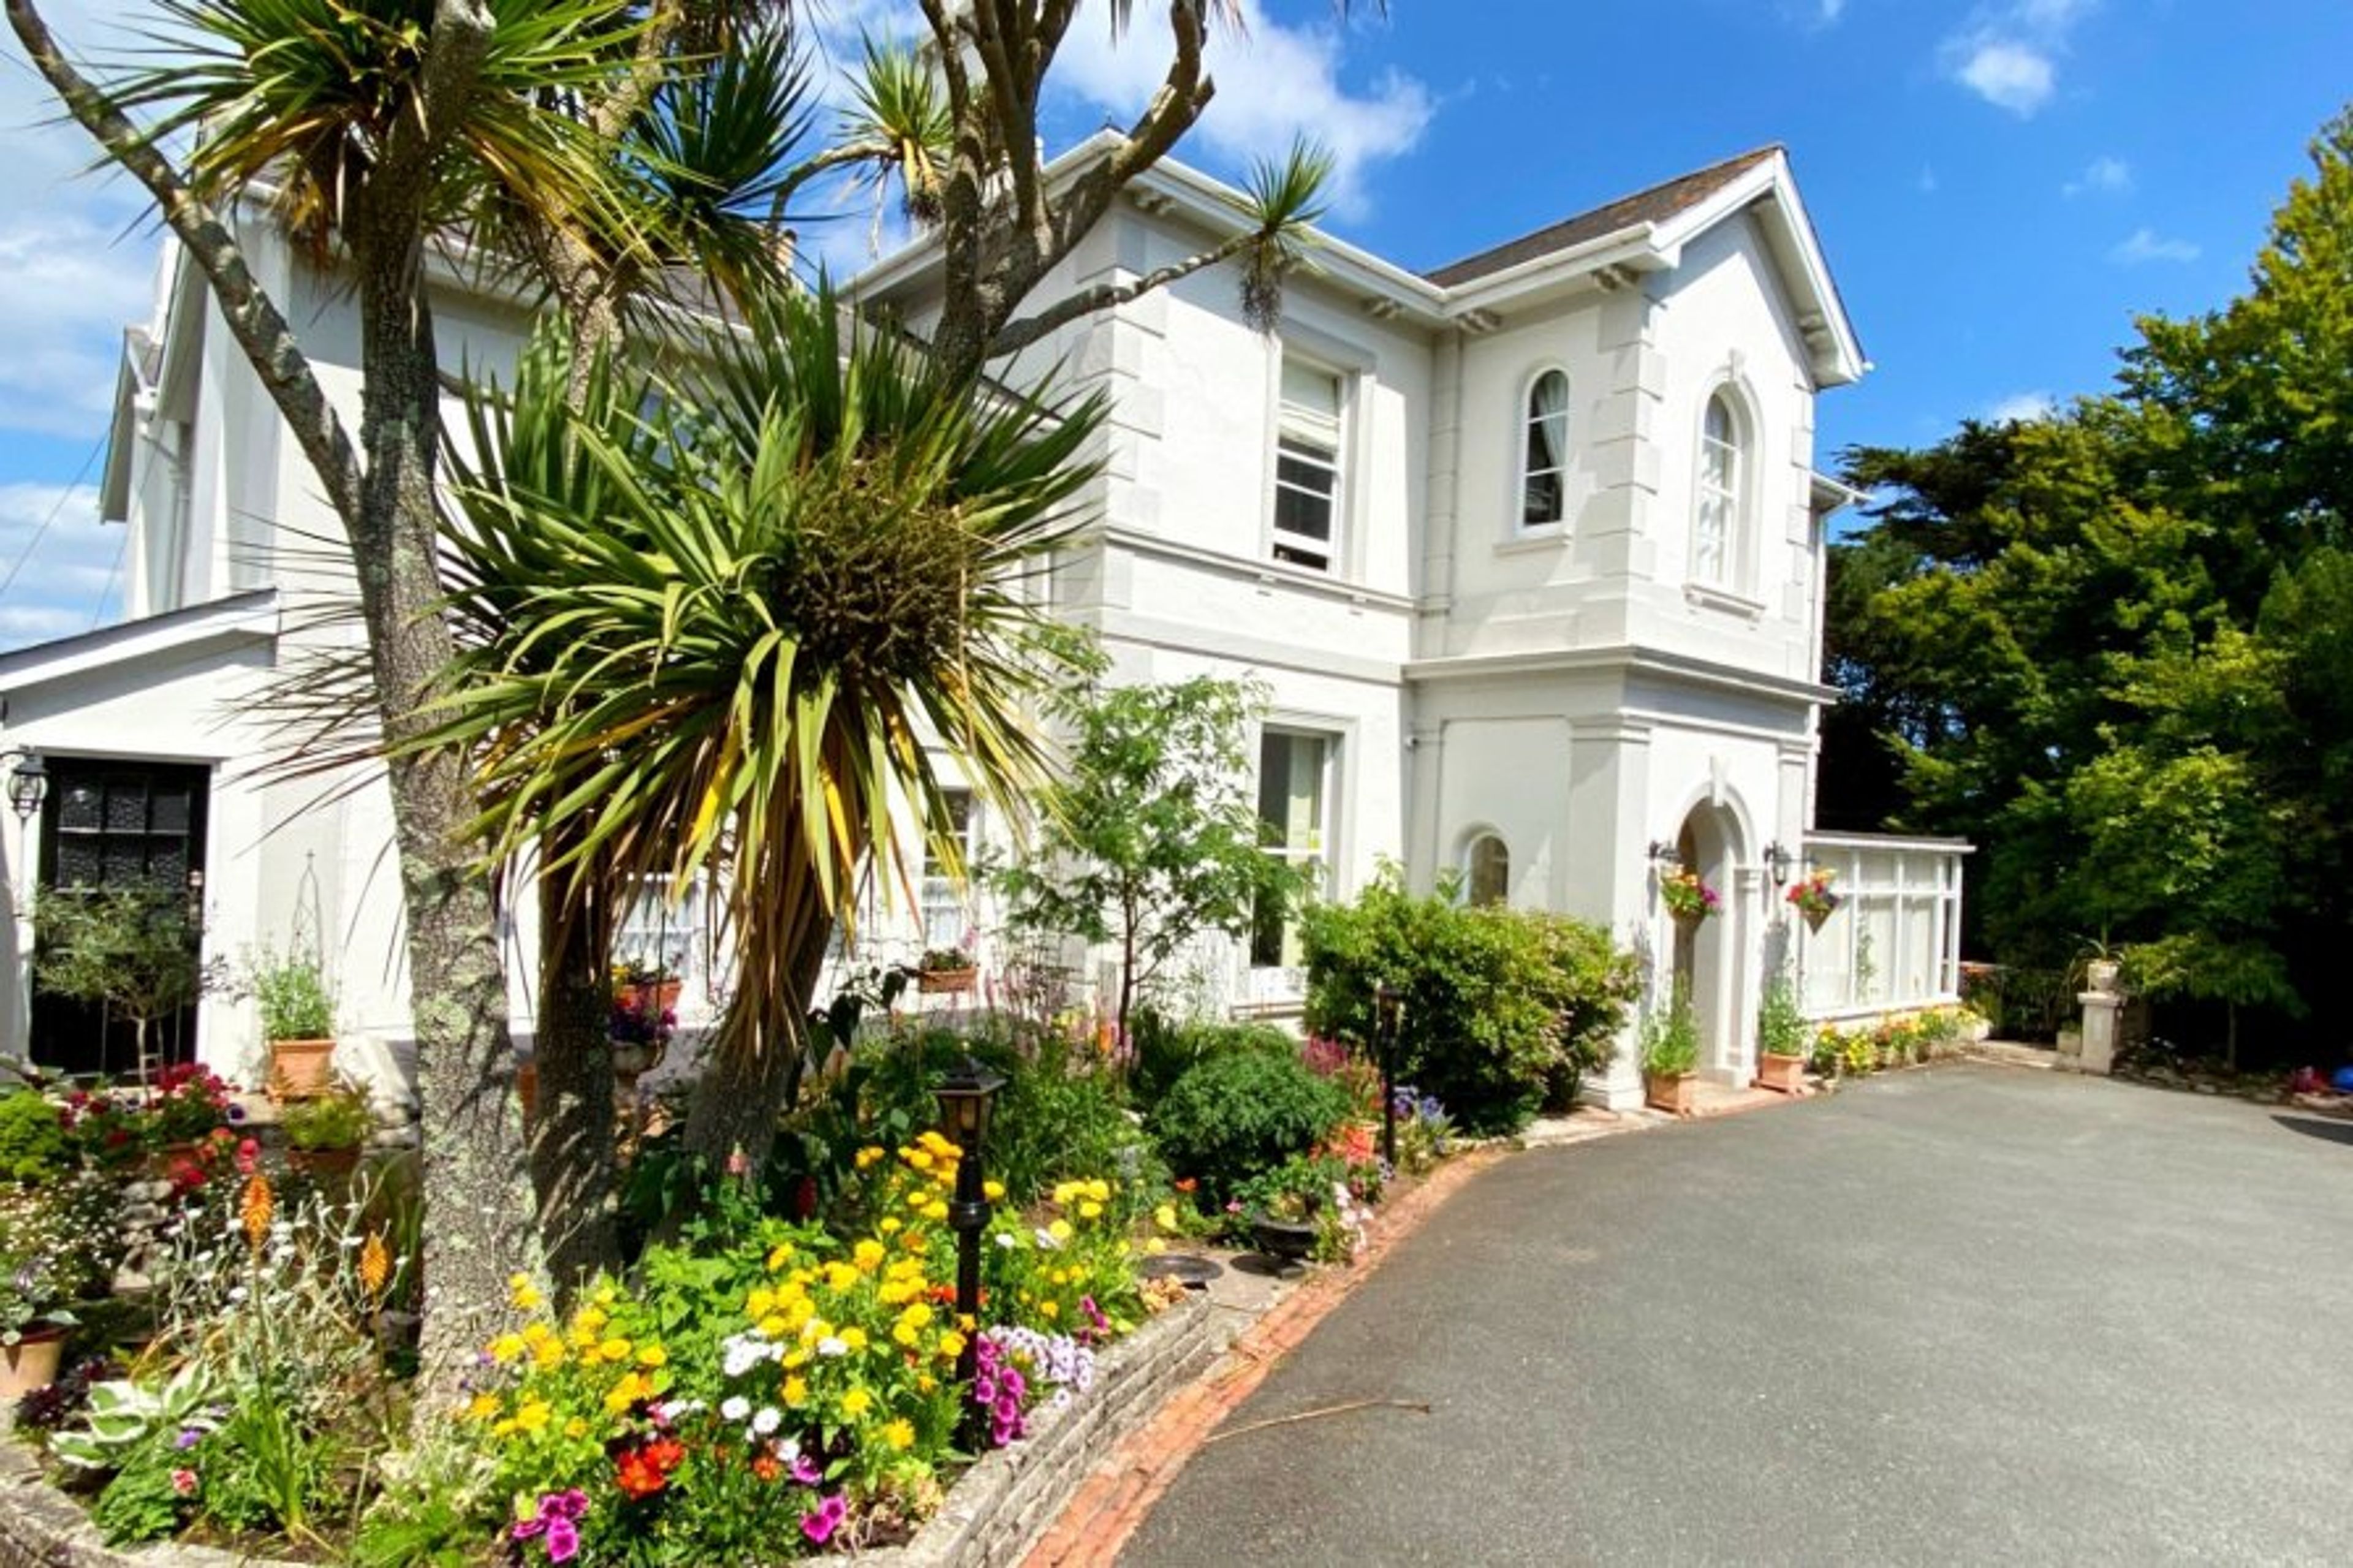 Period property in a leafy area of Torquay